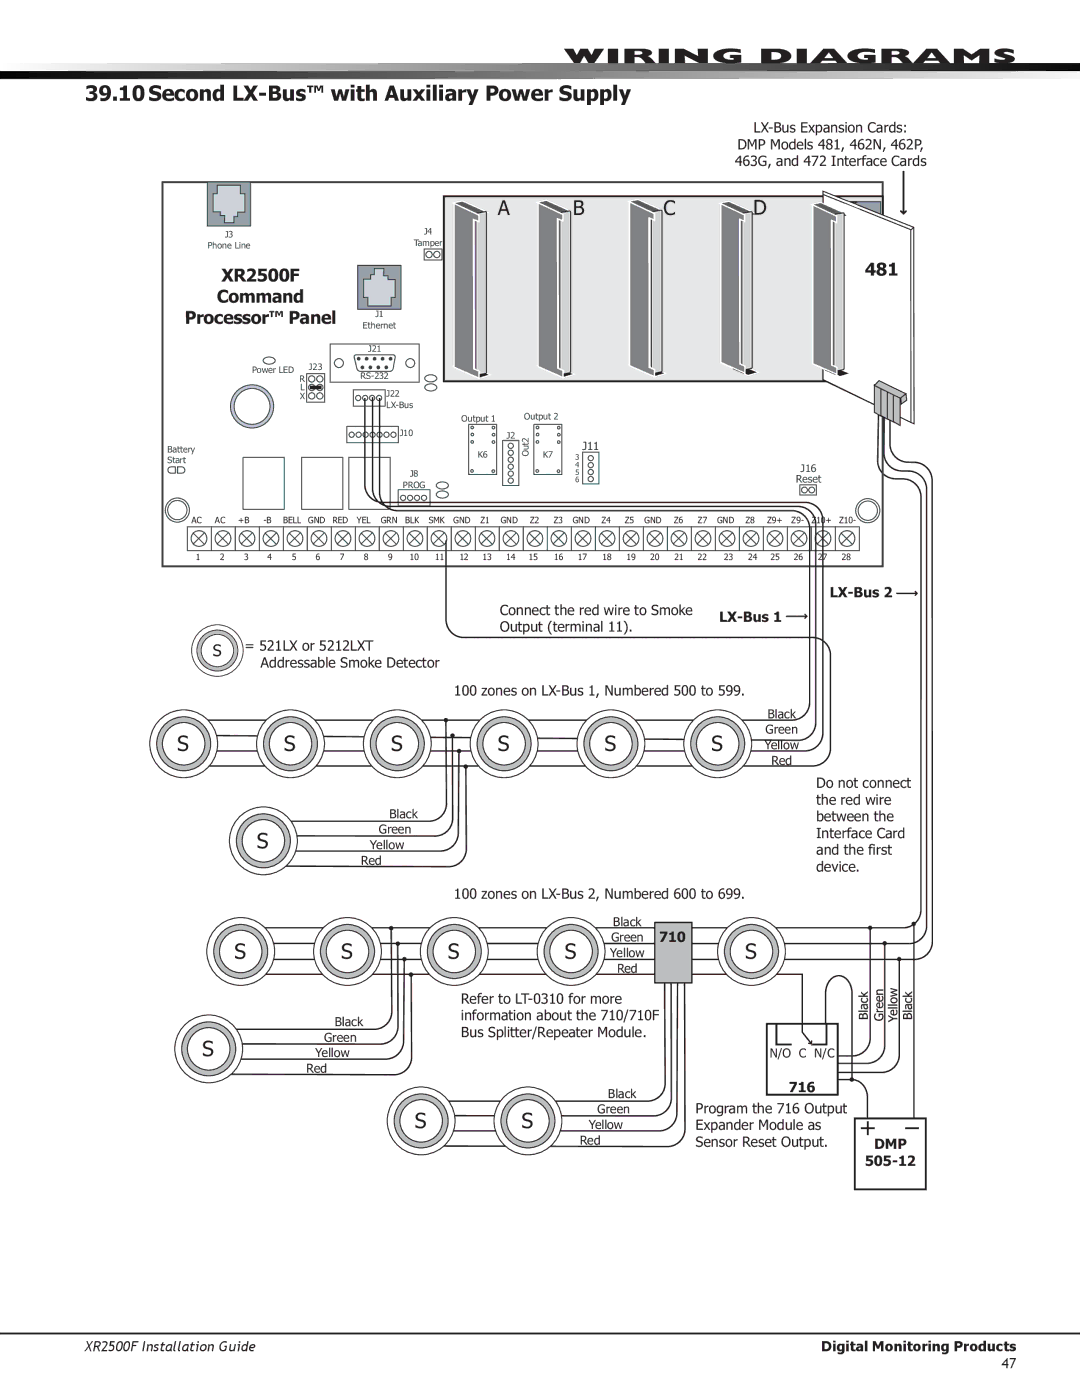 DMP Electronics manual Second LX-Bus with Auxiliary Power Supply, XR2500F 481 Command Processor Panel 